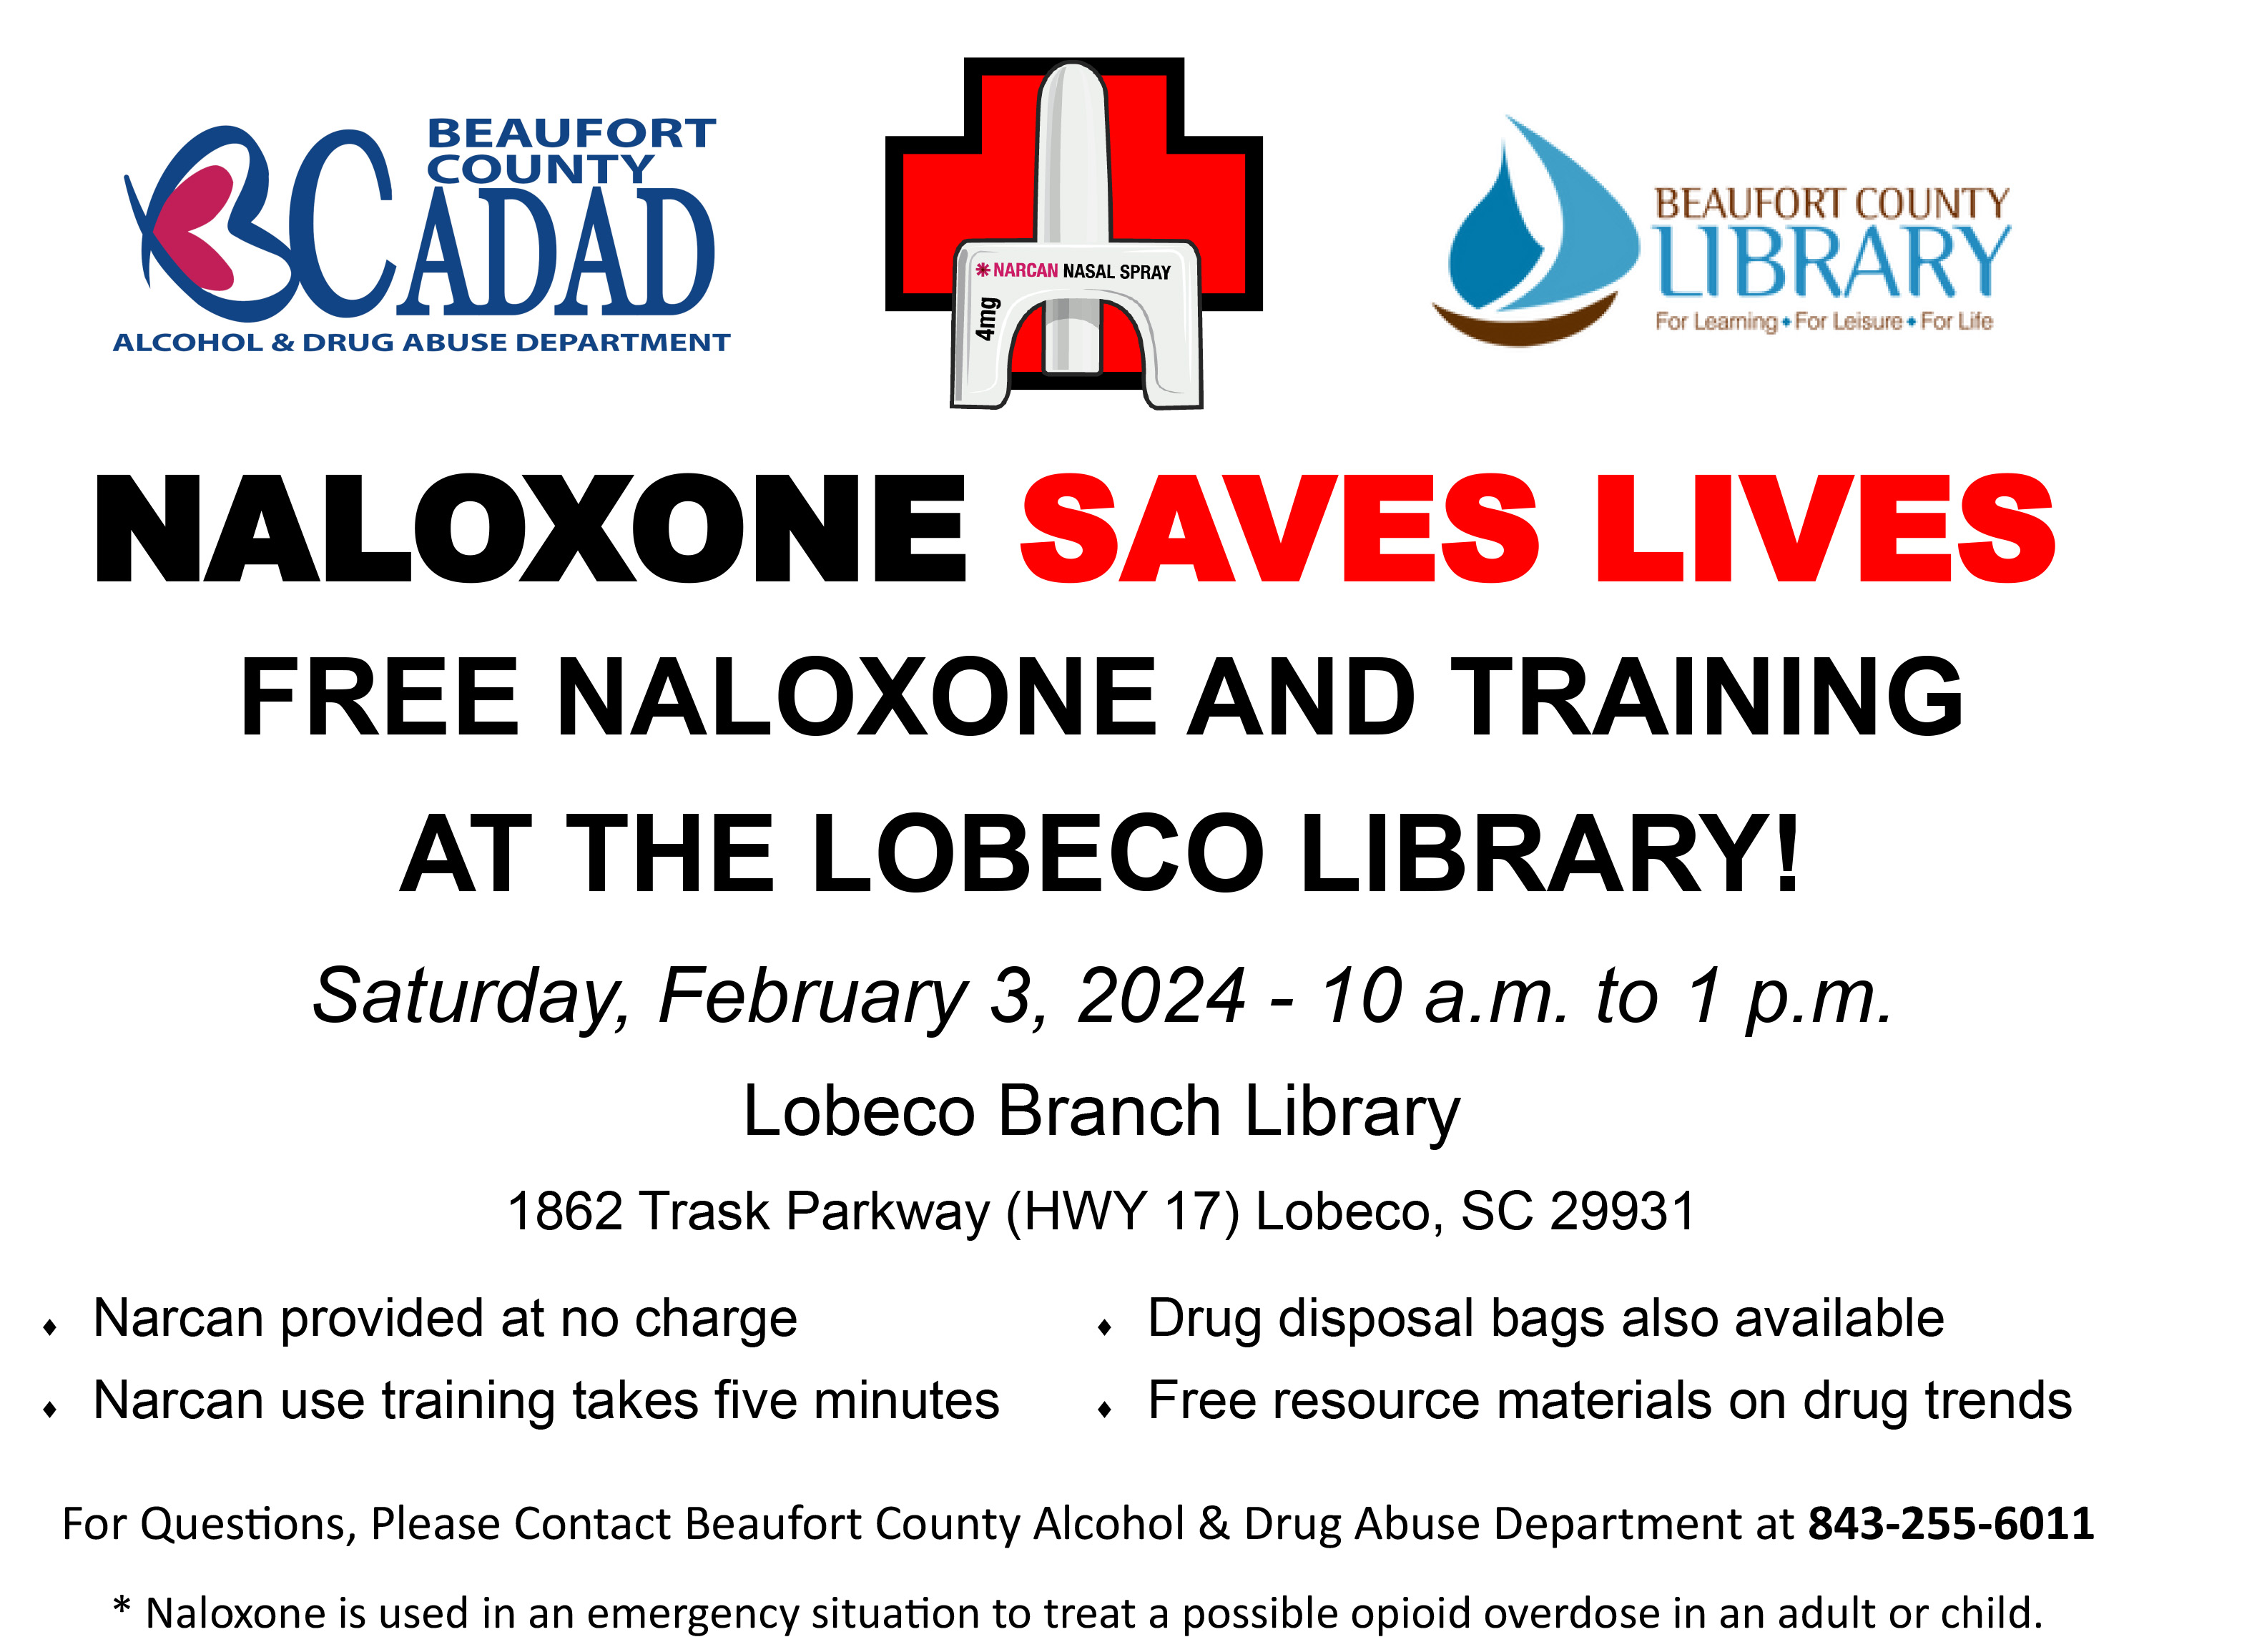 Free Naloxone and Training to be Held at Beaufort County Library Lobeco Branch, Saturday, February 3